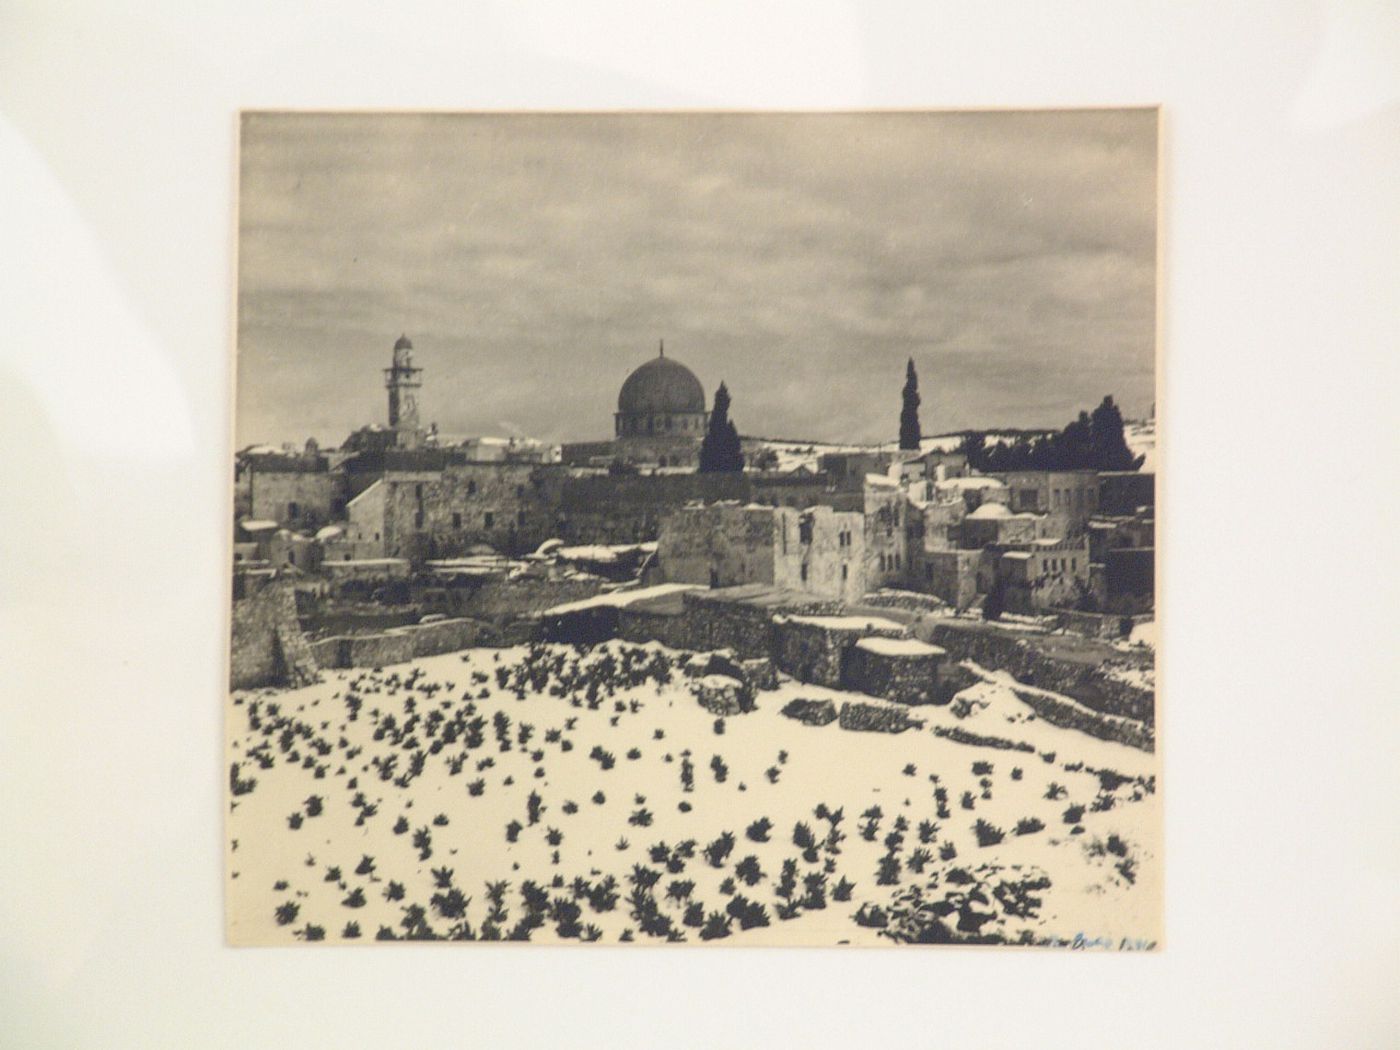 View of city in snow, looking towards Dome of the Rock, Jerusalem, Palestine